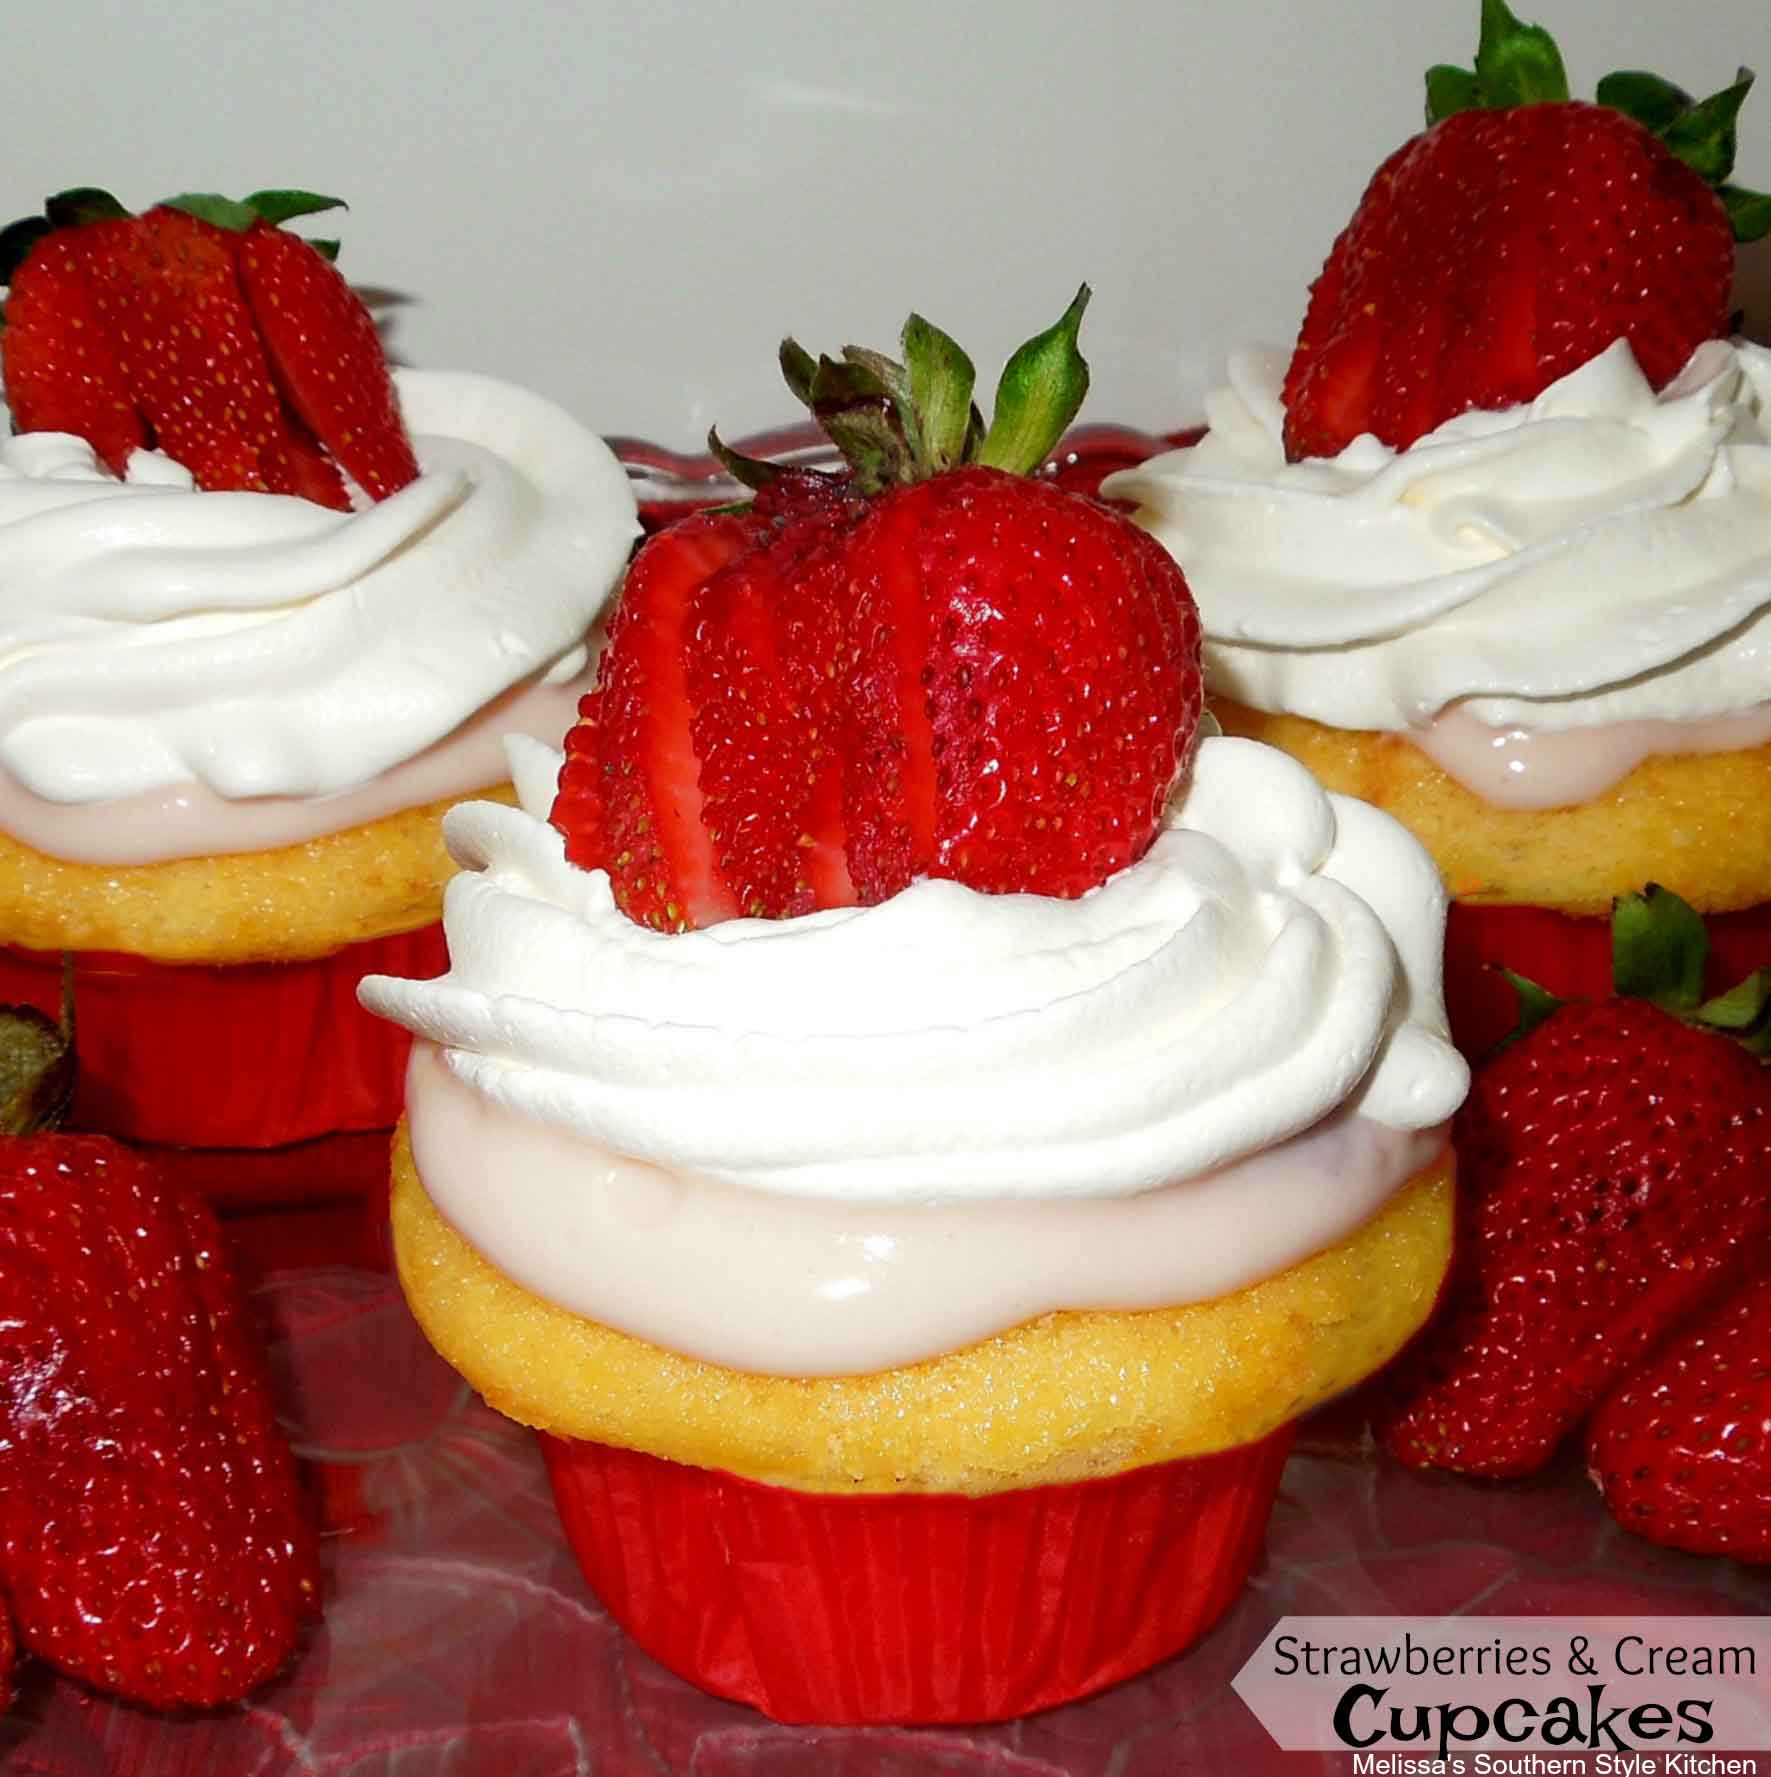 plated Strawberries and Cream Filled Cupcakes